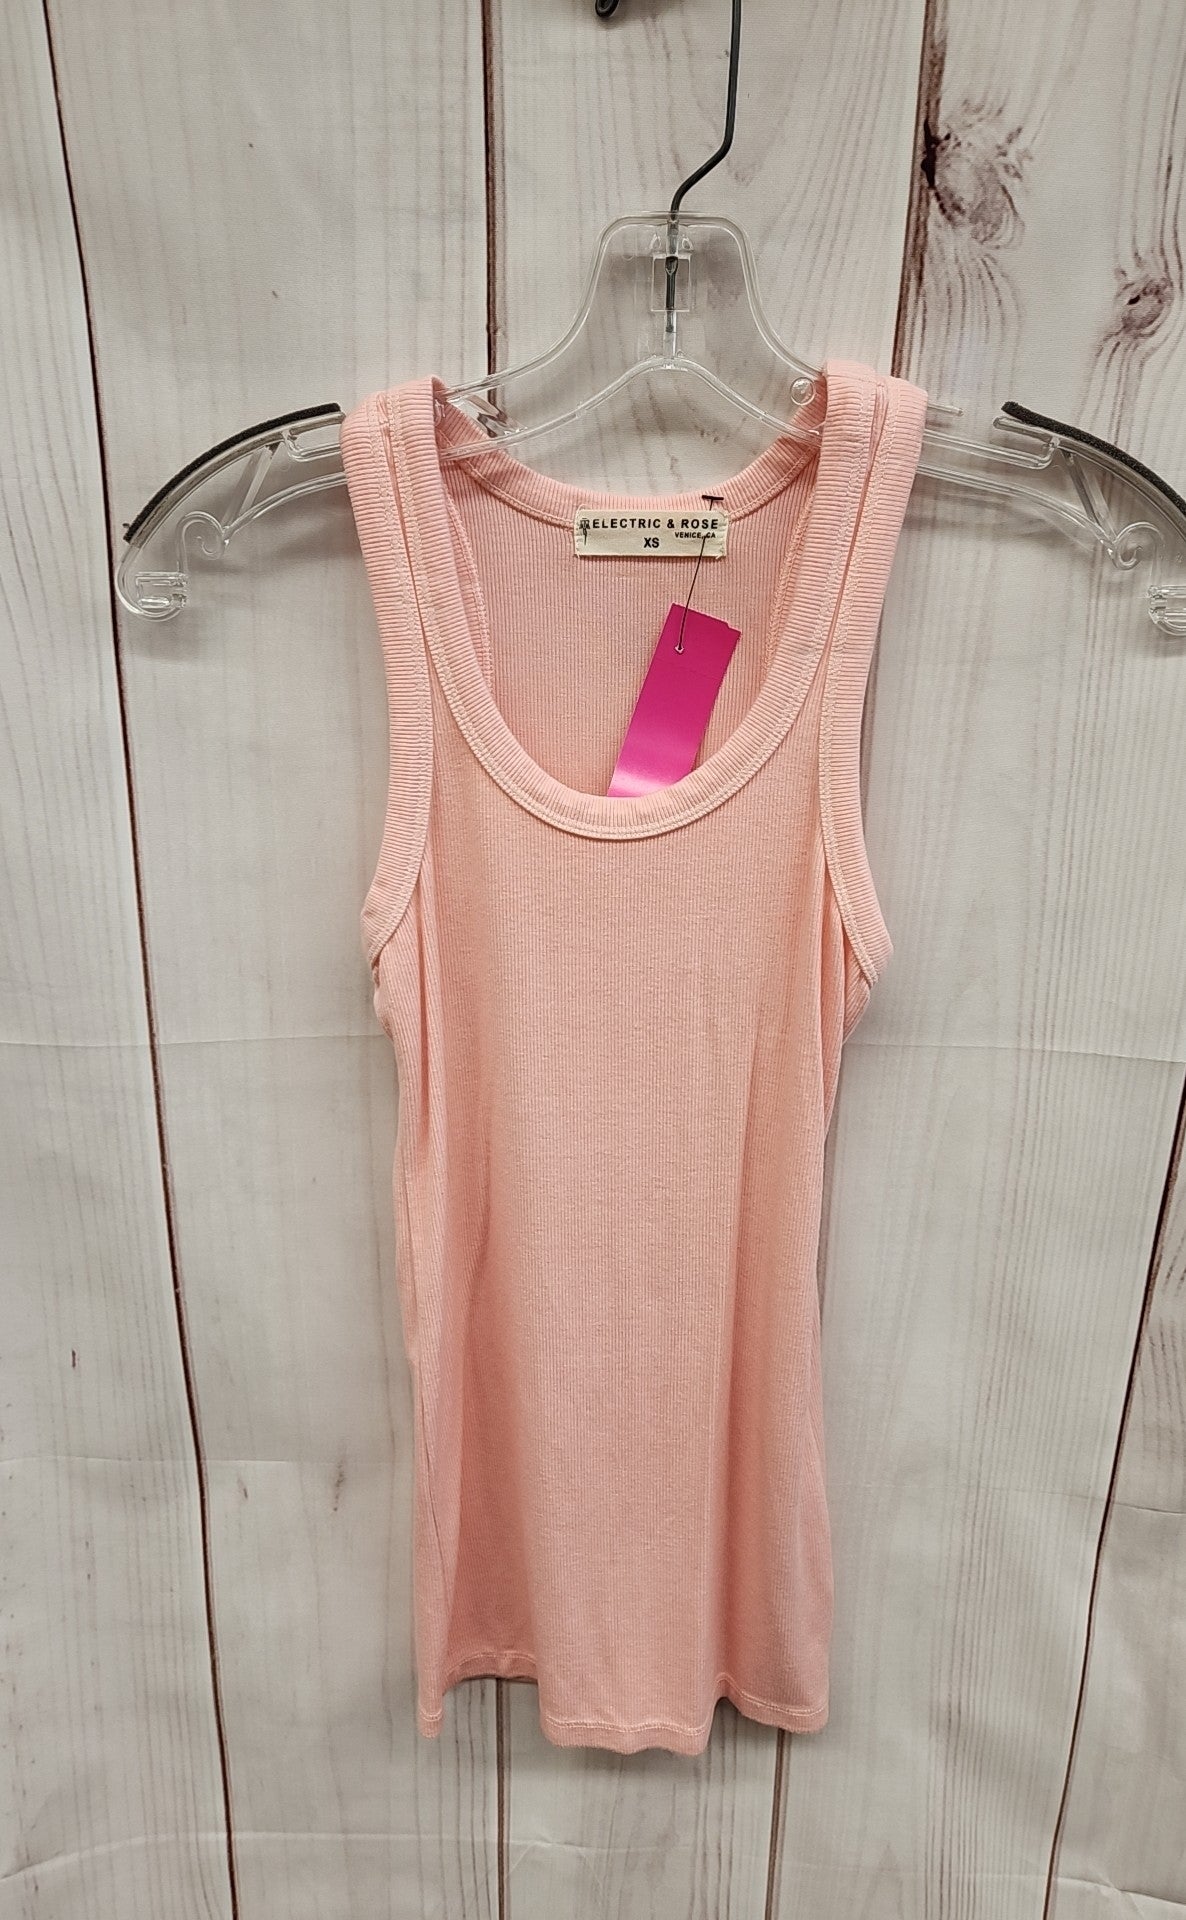 Electric&Rose Women's Size XS Pink Sleeveless Top